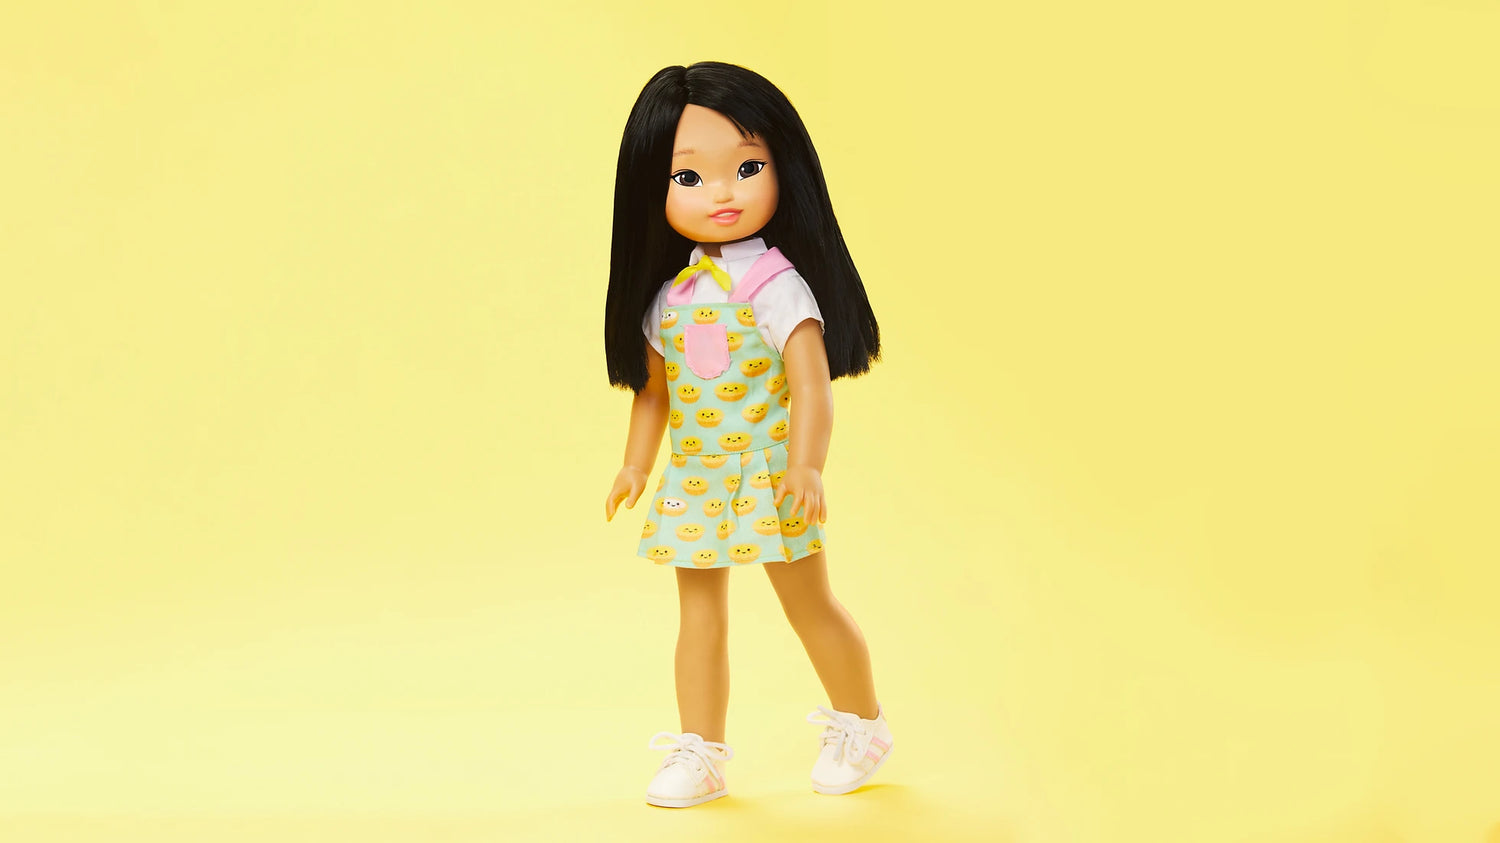 The Jilly doll  wearing an apron-inspired dress, short-sleeved shirt, bowtie and plastic sneakers